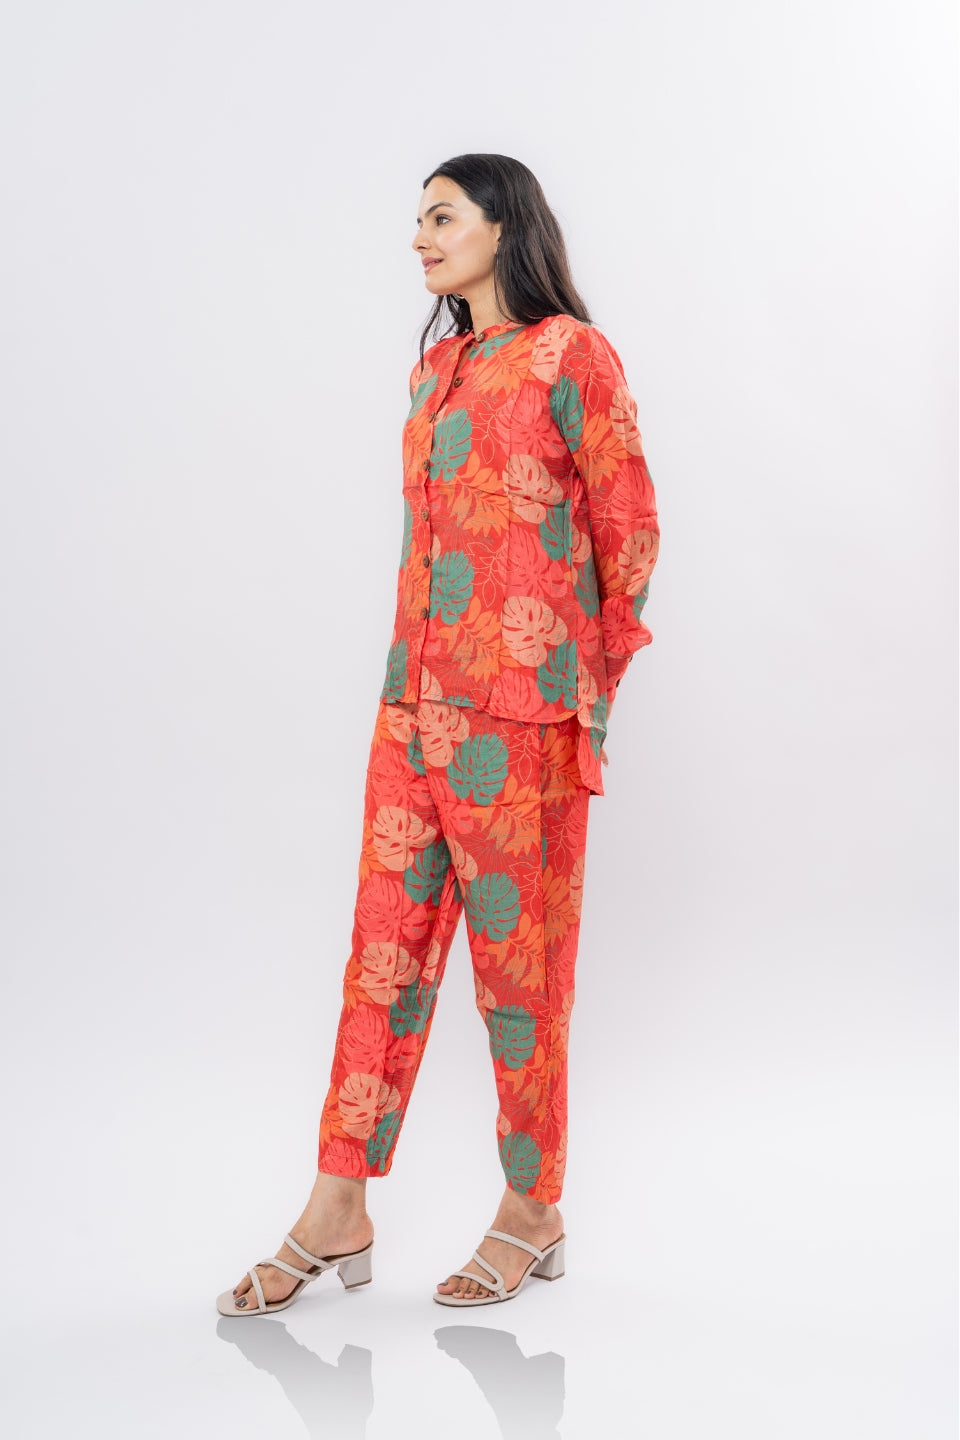 Ekisha's women muslin printed red floral co-ord set, another side view